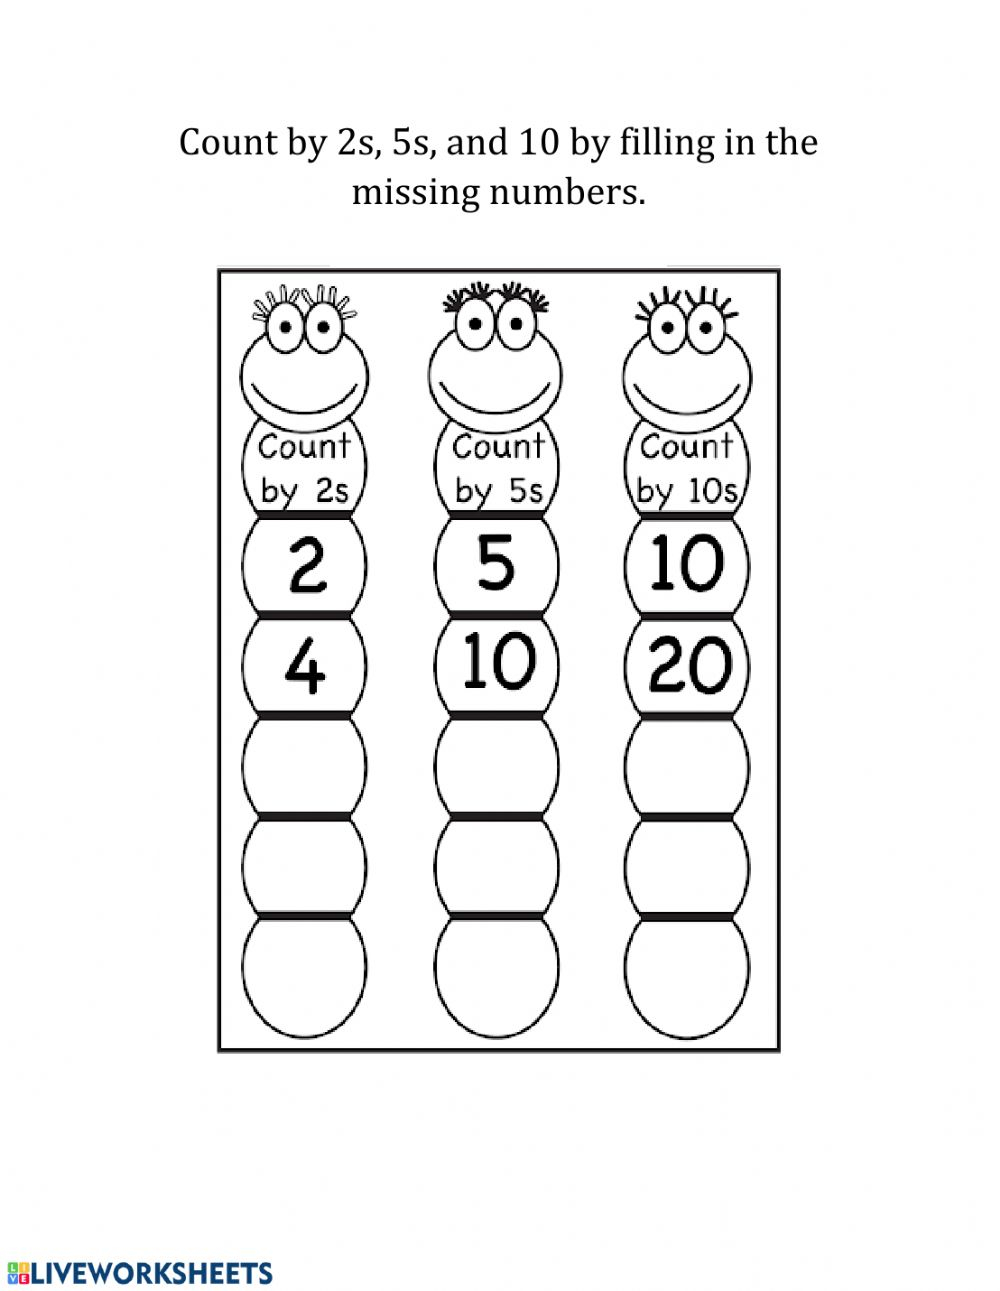 Count By 2s 5s And 10s Worksheet